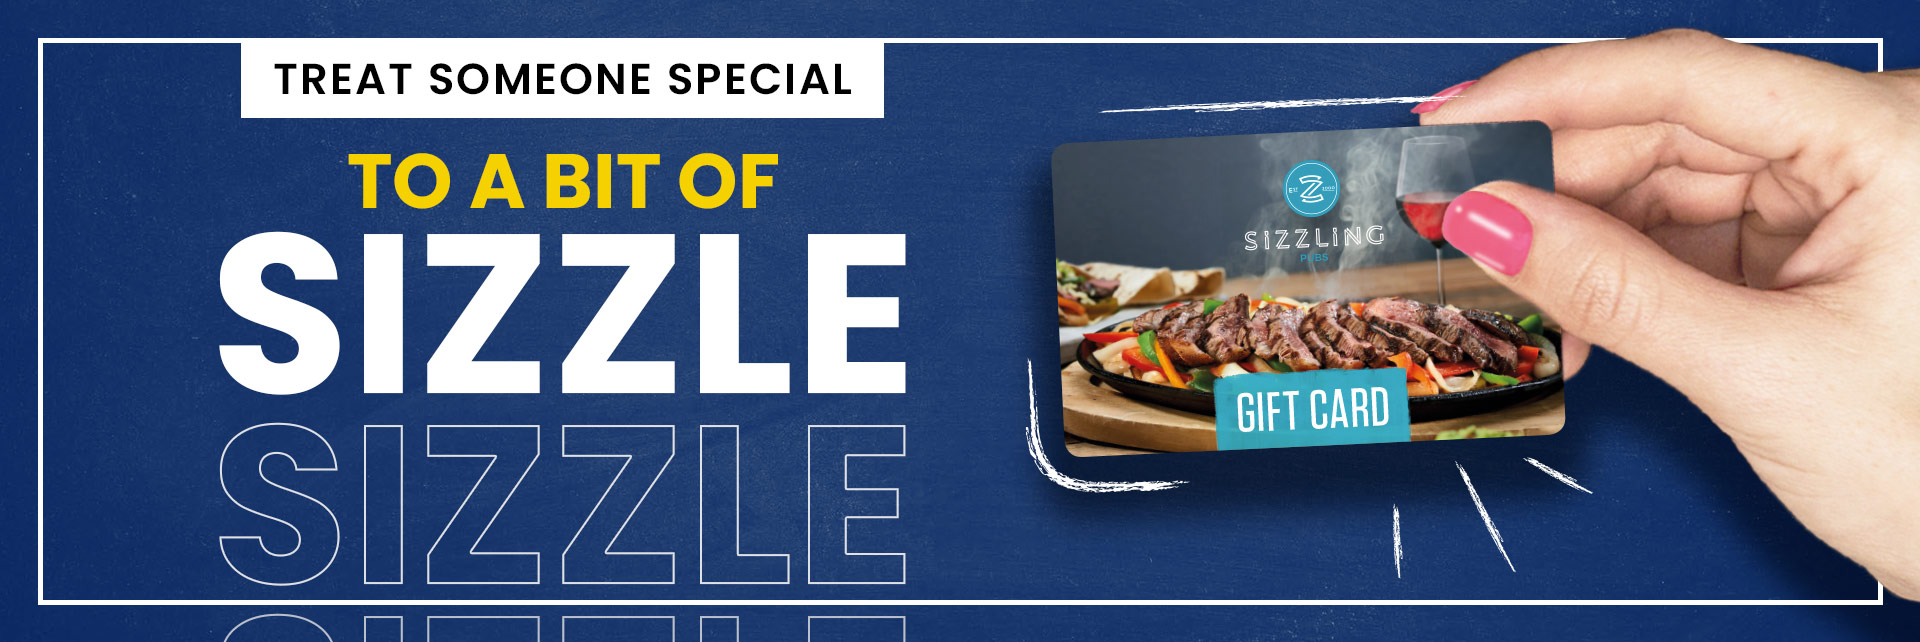 Sizzling Pubs Gift Card at The Pike and Musket in Gloucester